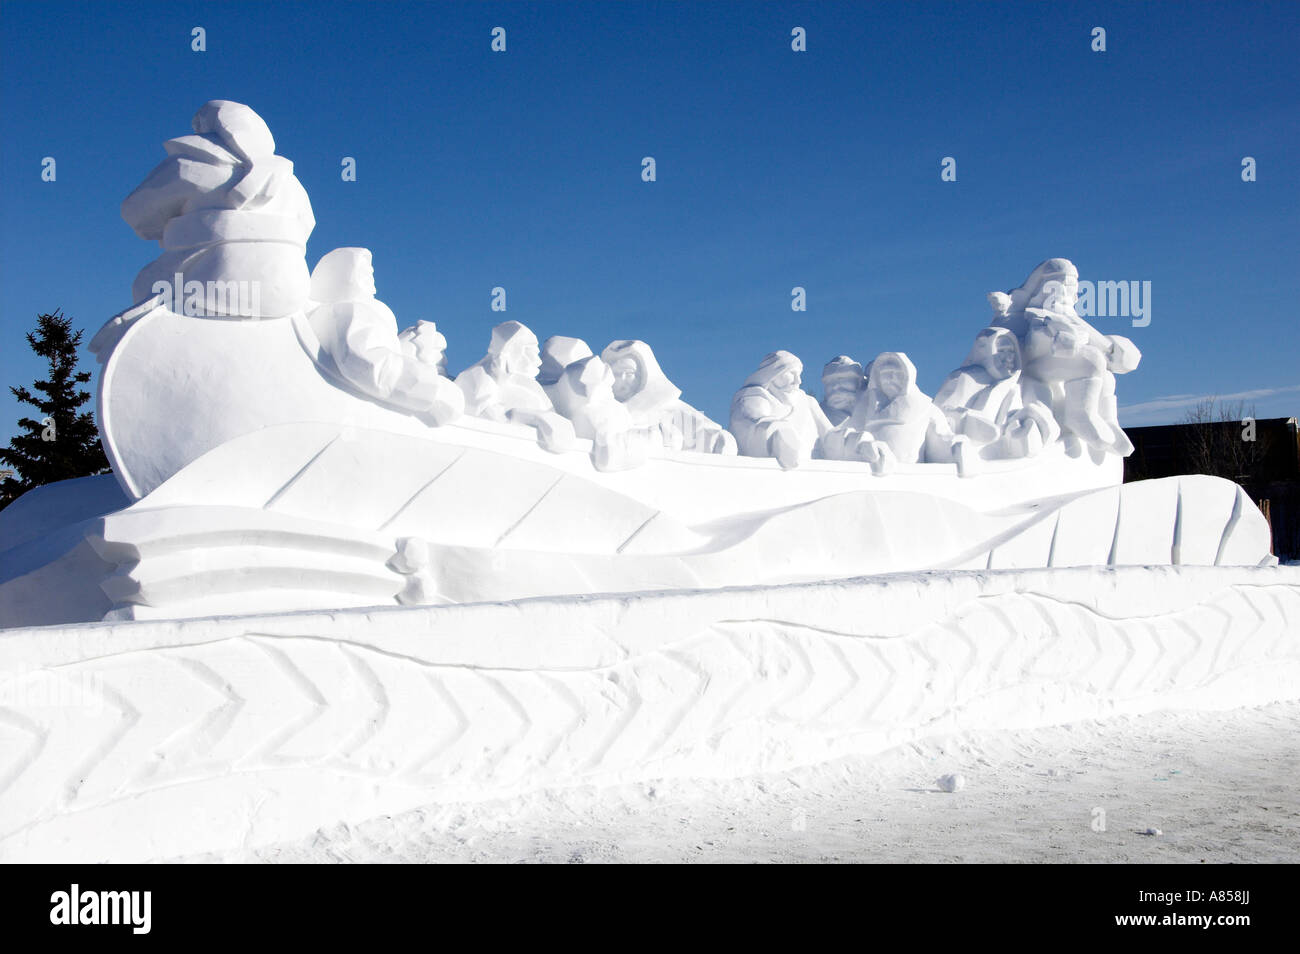 Snow sculpture of a voyageur canoe and voyageurs at the entrance to Fort  Gibralter in Winnipeg, Manitoba Canada Stock Photo - Alamy